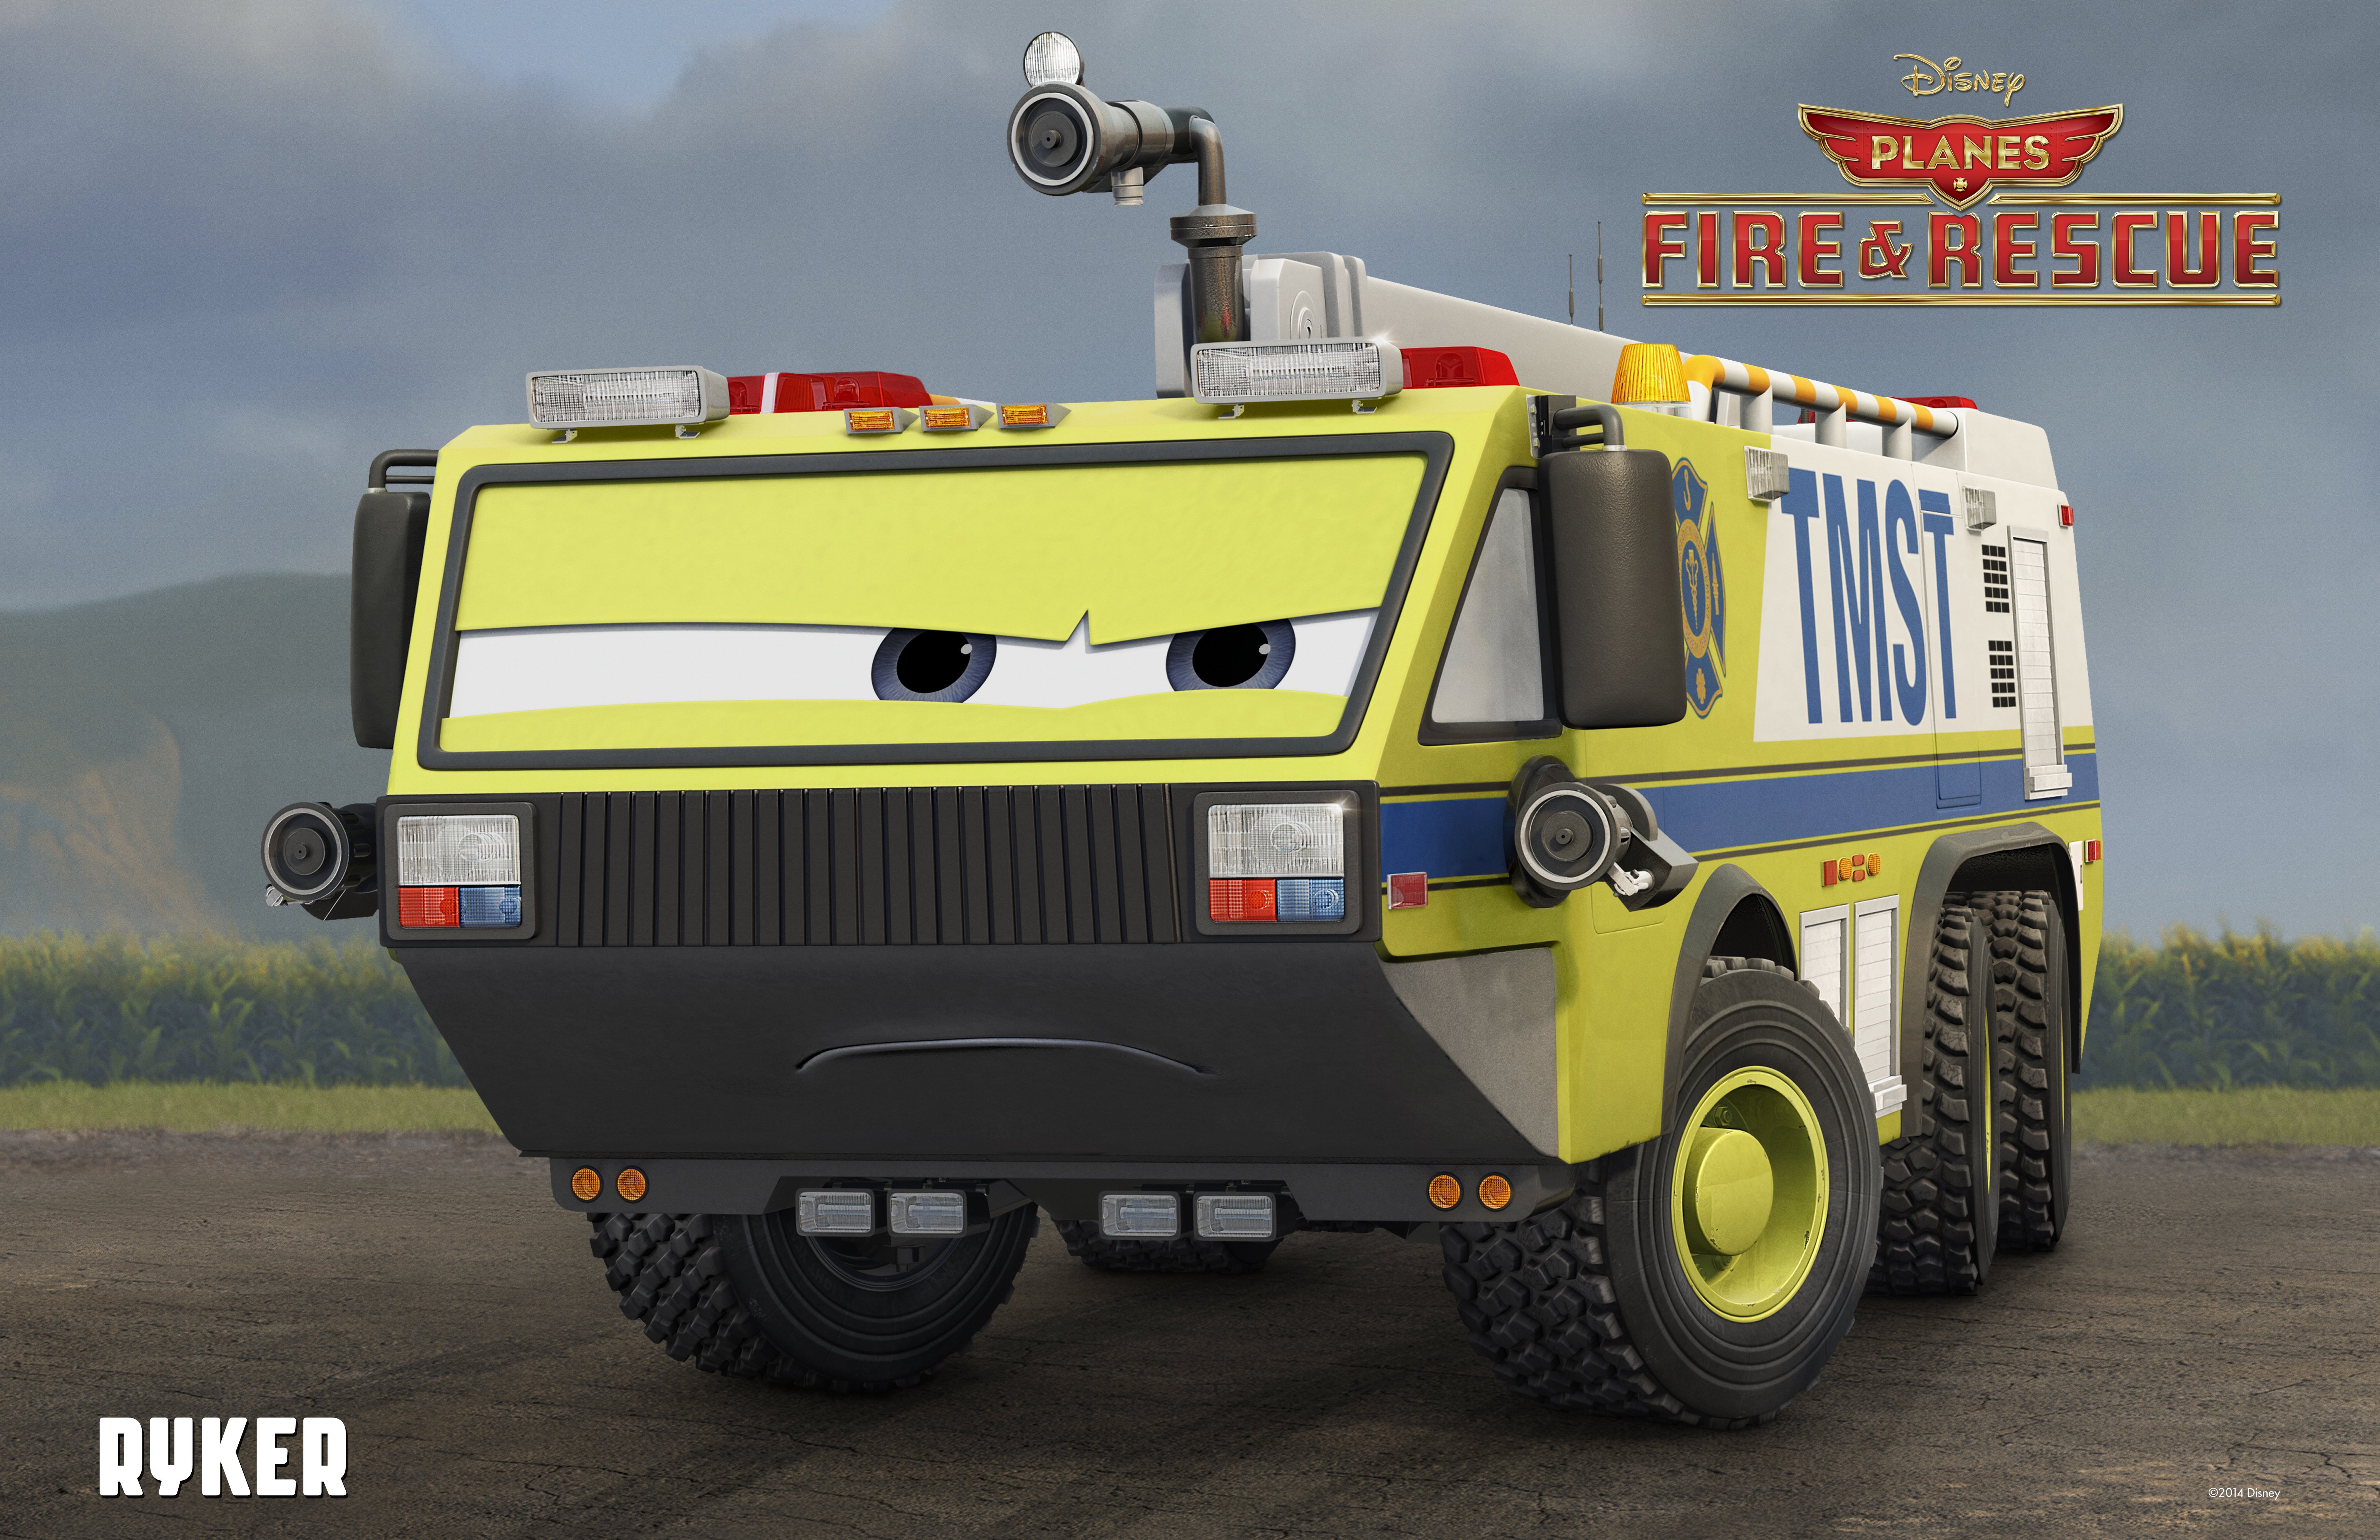 planes, Fire, Rescue, Animation, Aircraft, Airplane, Comedy, Family, 1pfr, Disney, Emergency, Poster Wallpaper